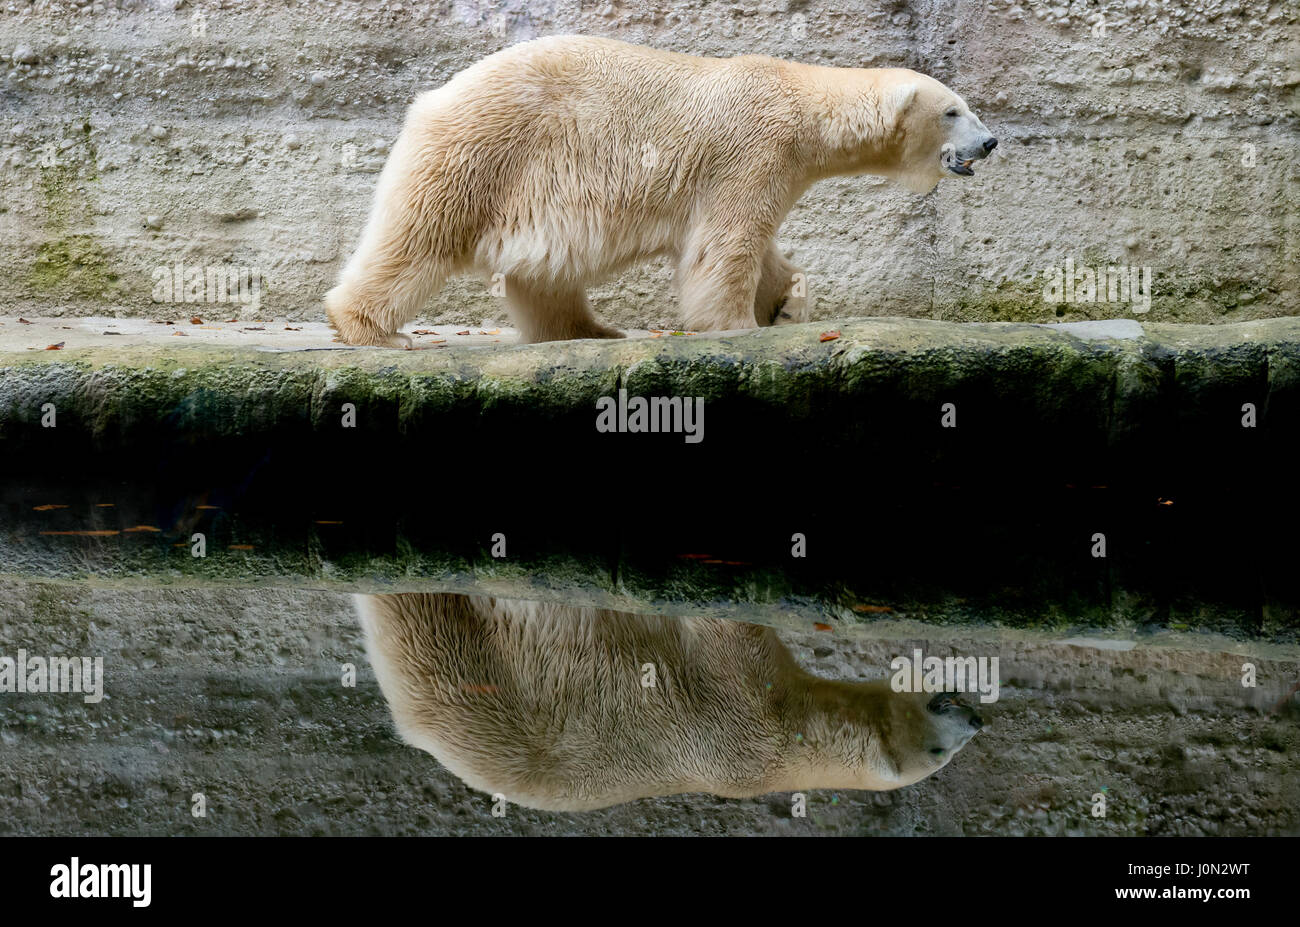 Munich, Germany. 07th Nov, 2014. dpatop - (FILE) · An archive picture, dated 07.11.2014, shows the polar bear "Yoghi" walking in its enclosement at the Hellabrunn Zoo in Munich, Germany. According to an announcement made by the Zoo on Good Friday, Yoghi met an untimely death on 13 April 2017. (from dpa's "Yoghi the polar bear dies" from 14 April 2017) Photo: Sven Hoppe/dpa/Alamy Live News Stock Photo